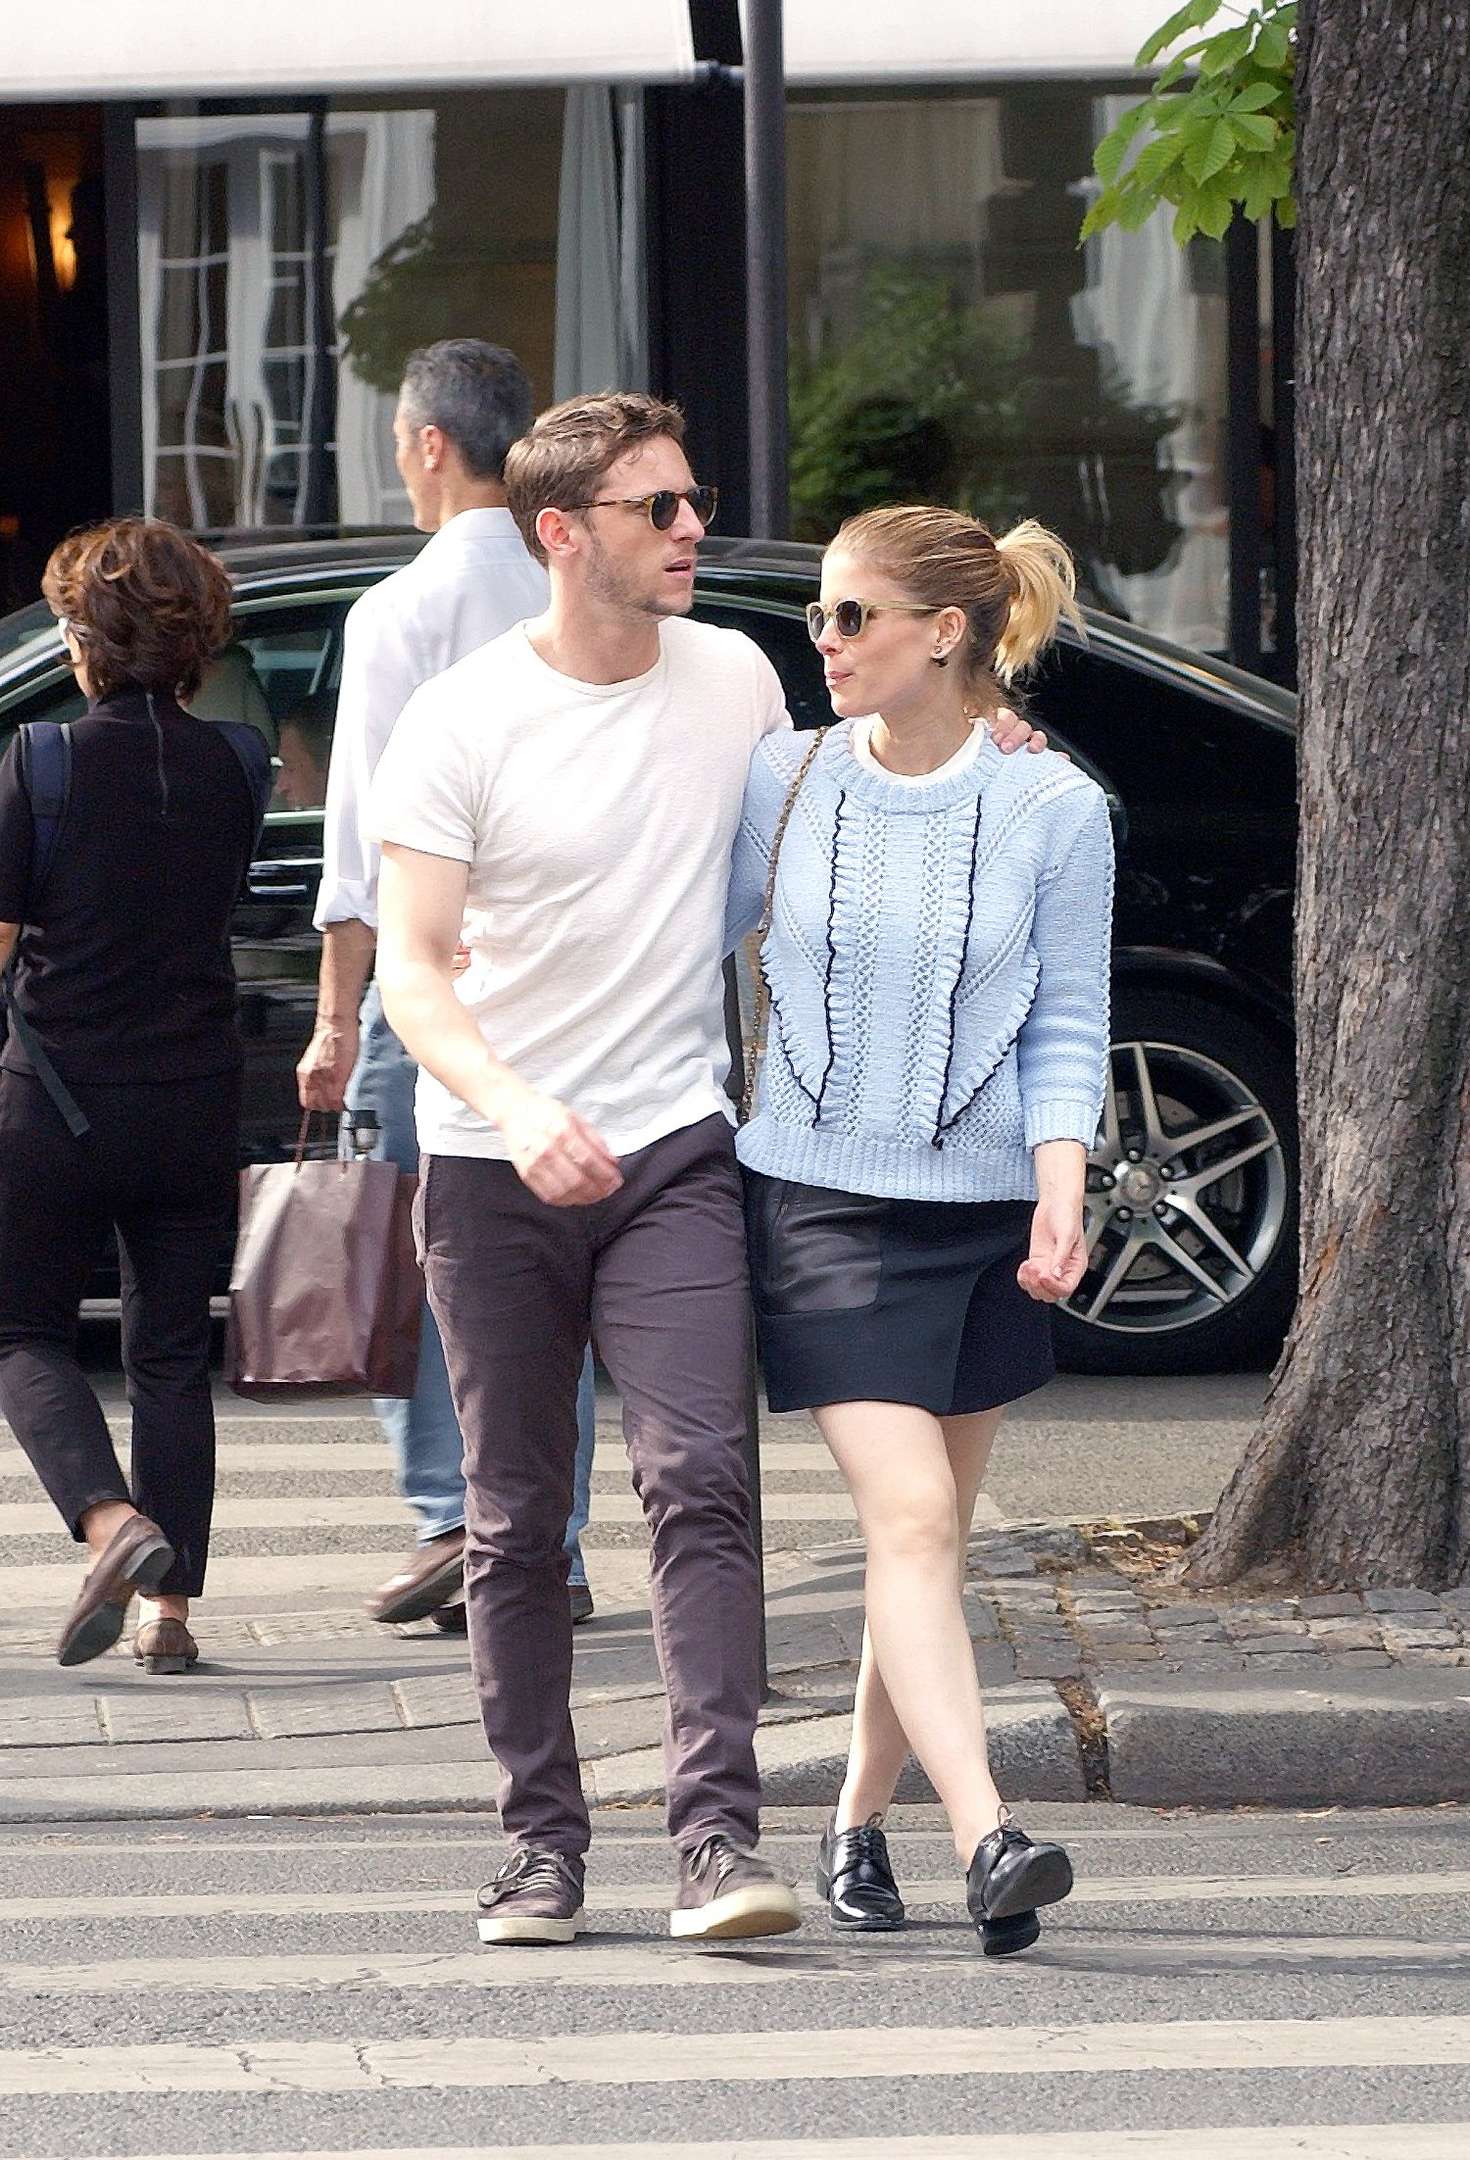 Kate Mara in Mini skirt with Jamie Bell out in Paris